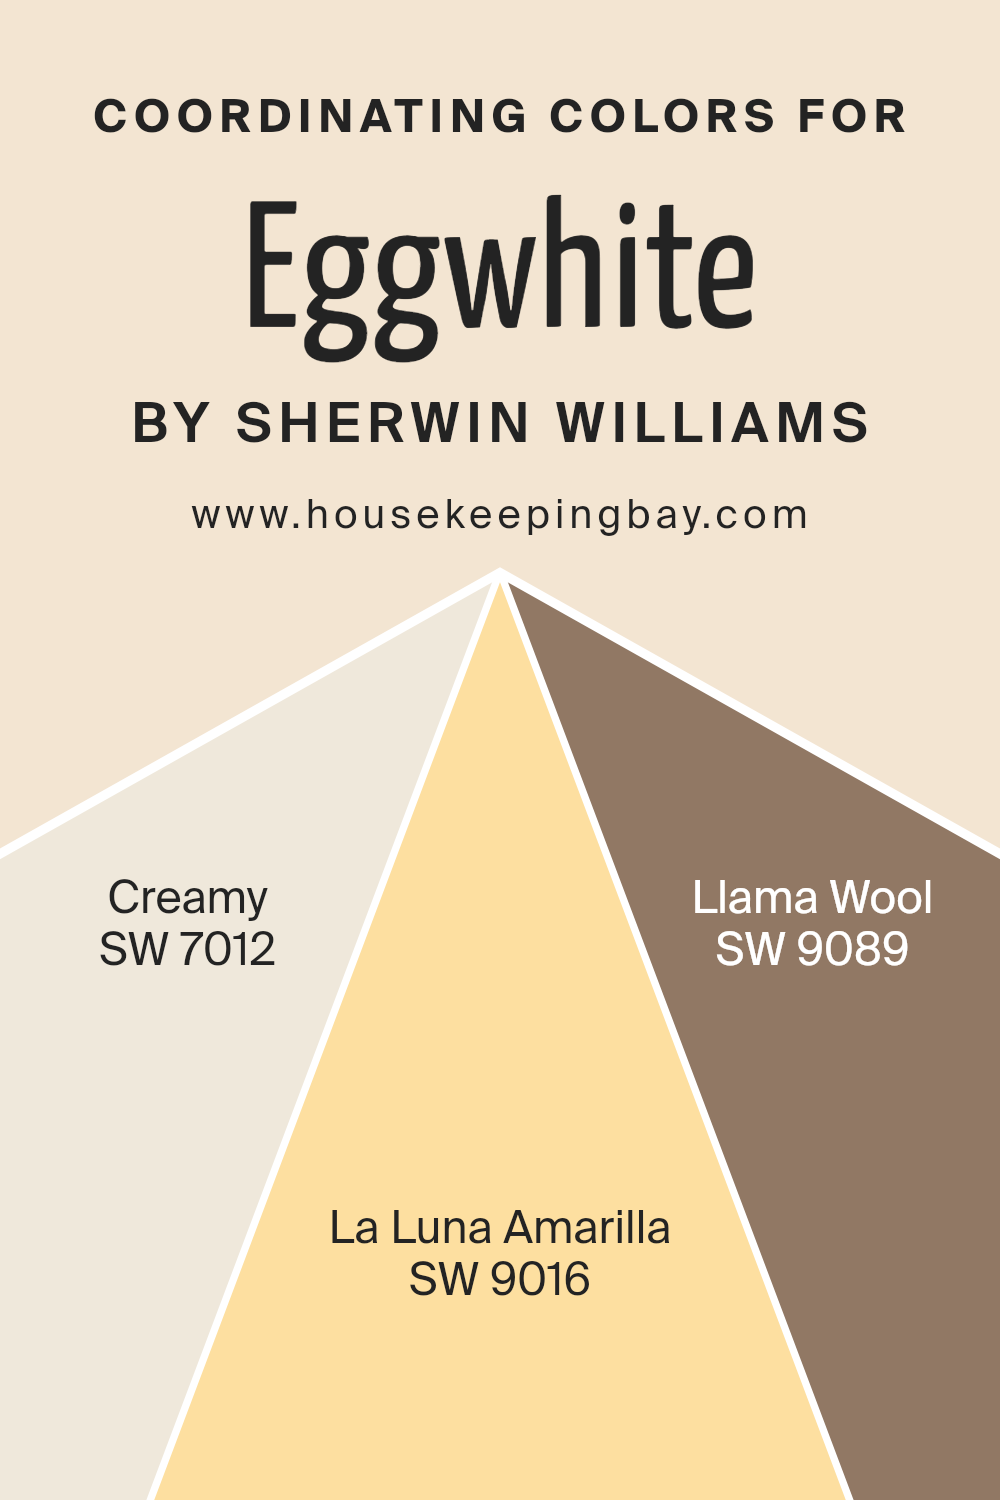 coordinating_colors_of_eggwhite_sw_6364